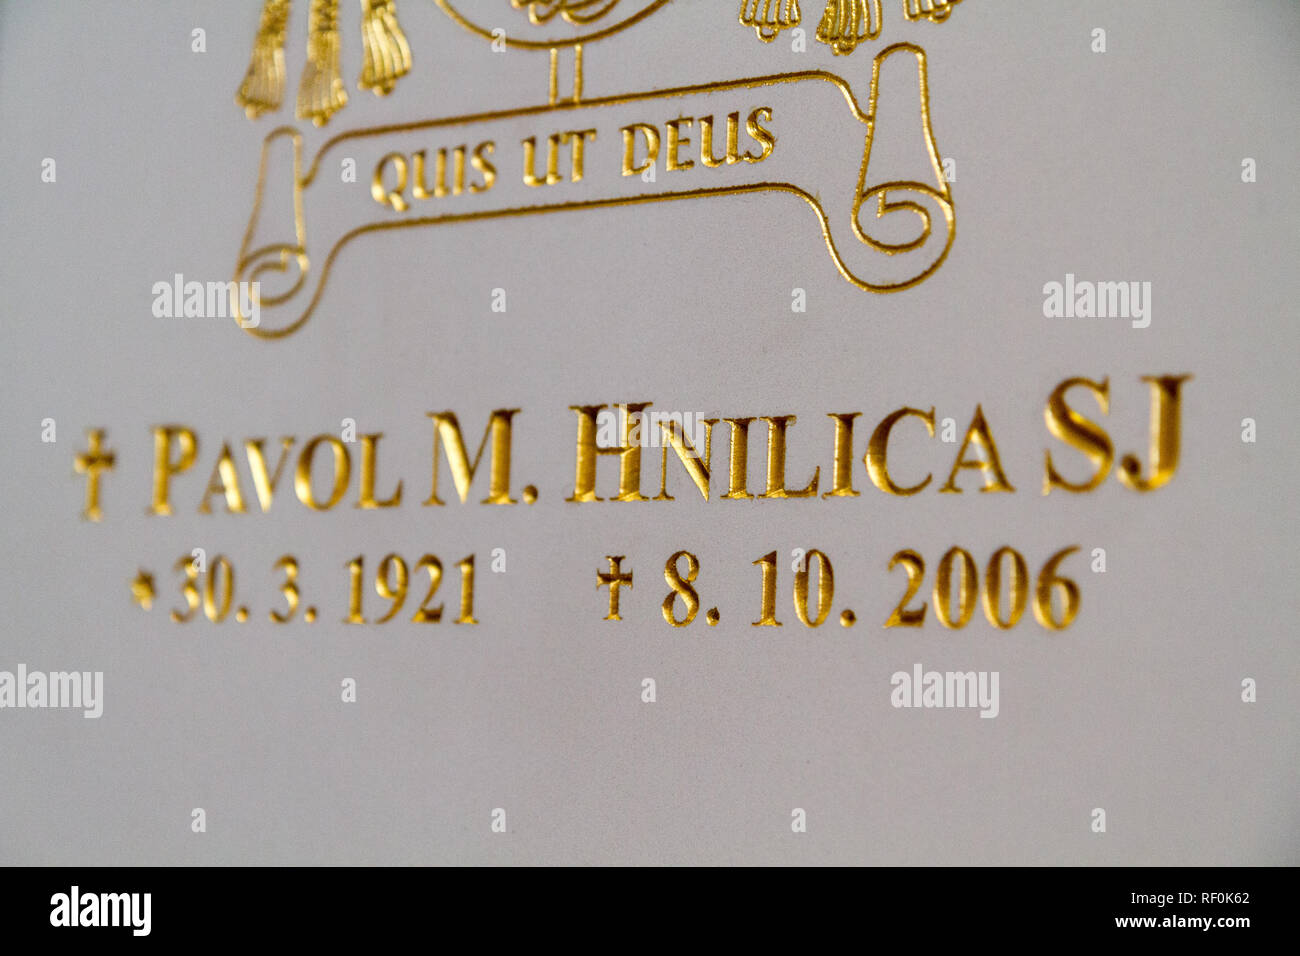 Trnava, Slovakia. 2018/4/12. The tombstone of the saintly bishop Pavol Hnilica with his motto: "Quis ut Deus?" meaning: ""Who [is] like God?". Stock Photo